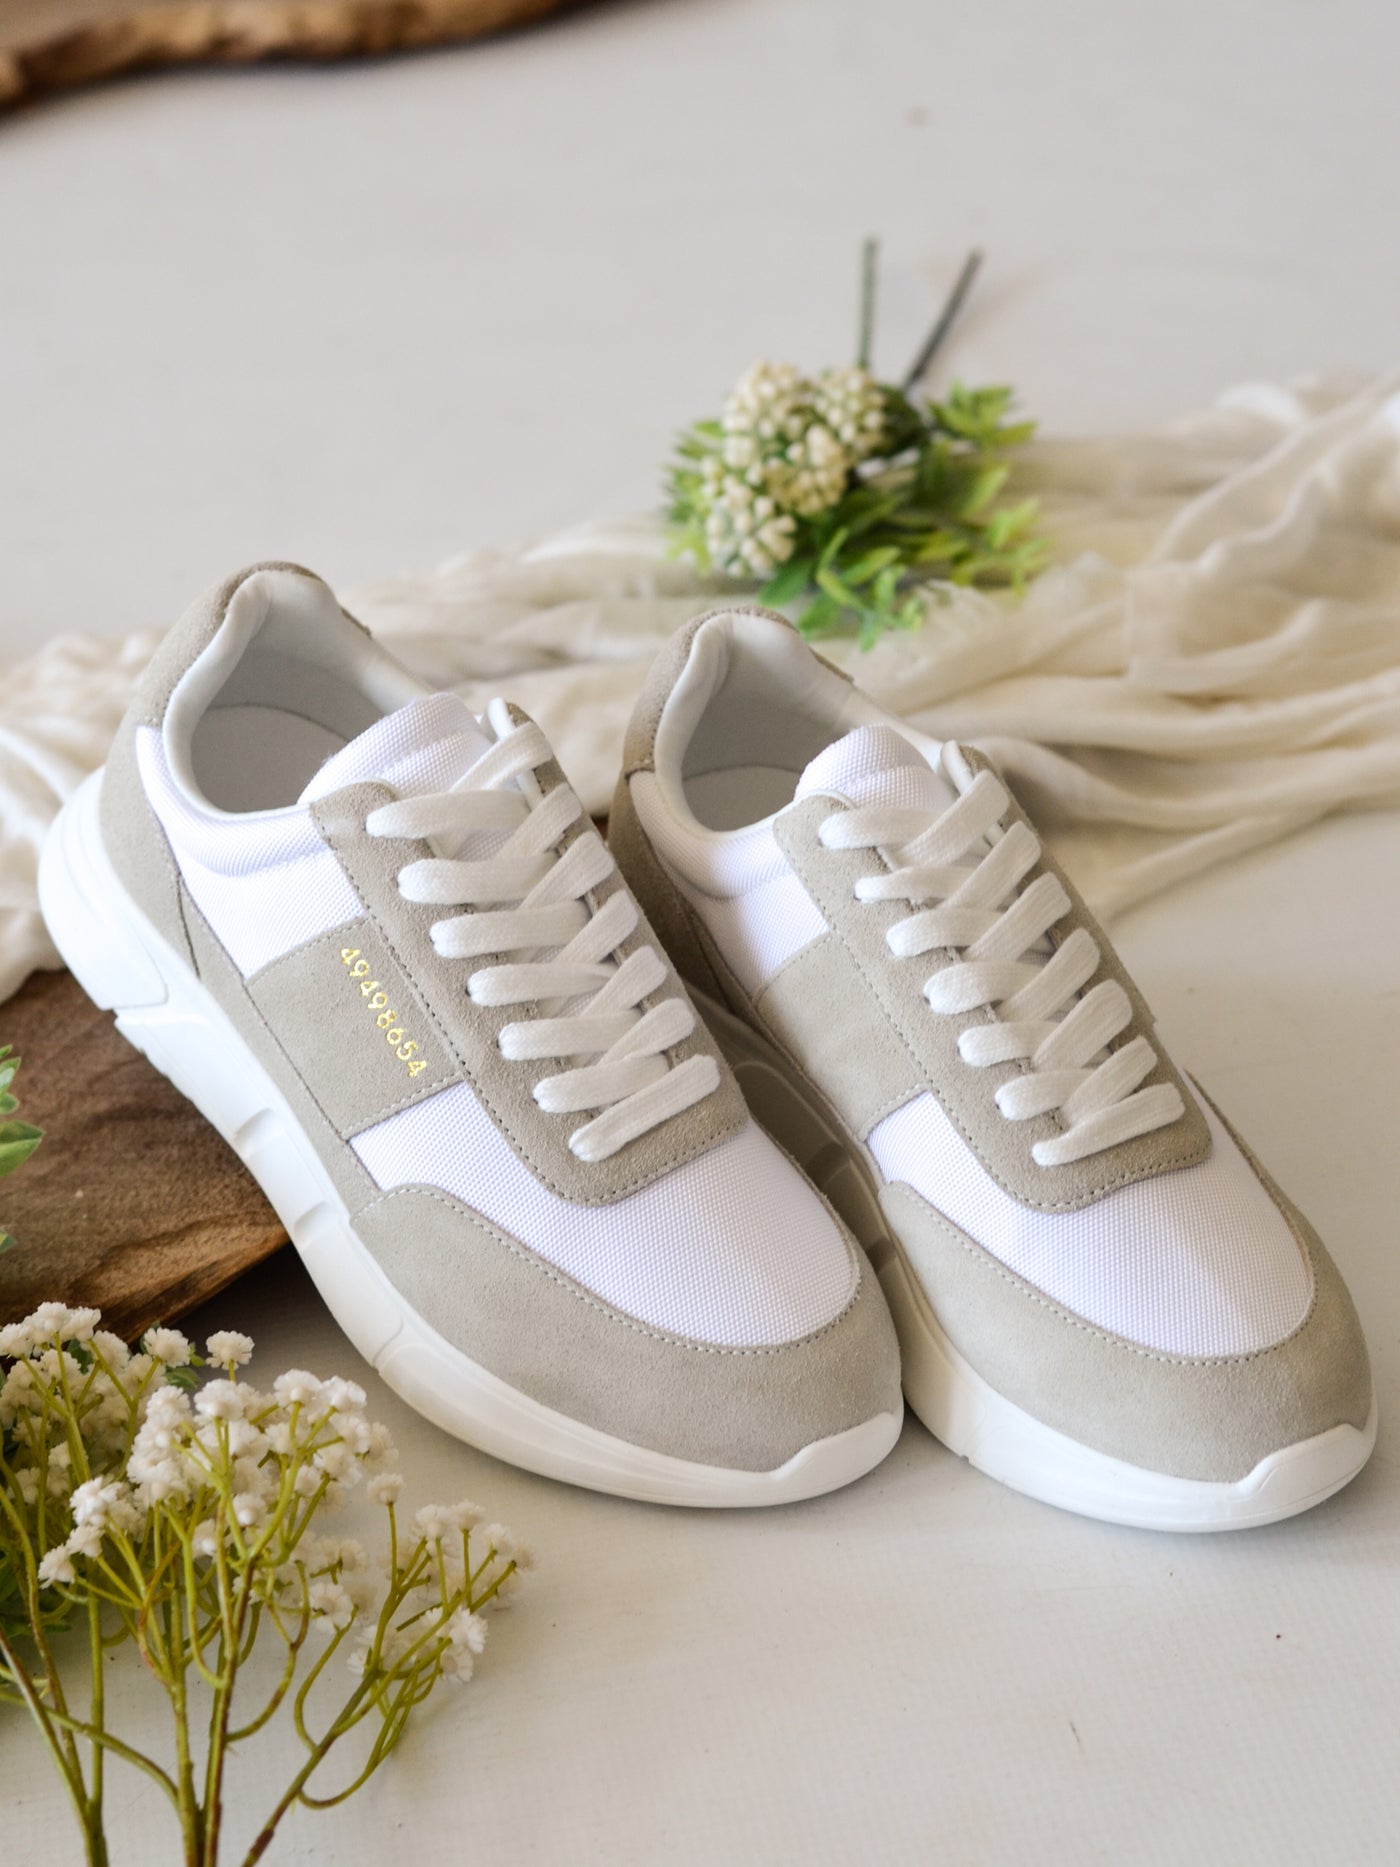 LV Trainer Maxi White Newest Retail Materials Version Is Ready